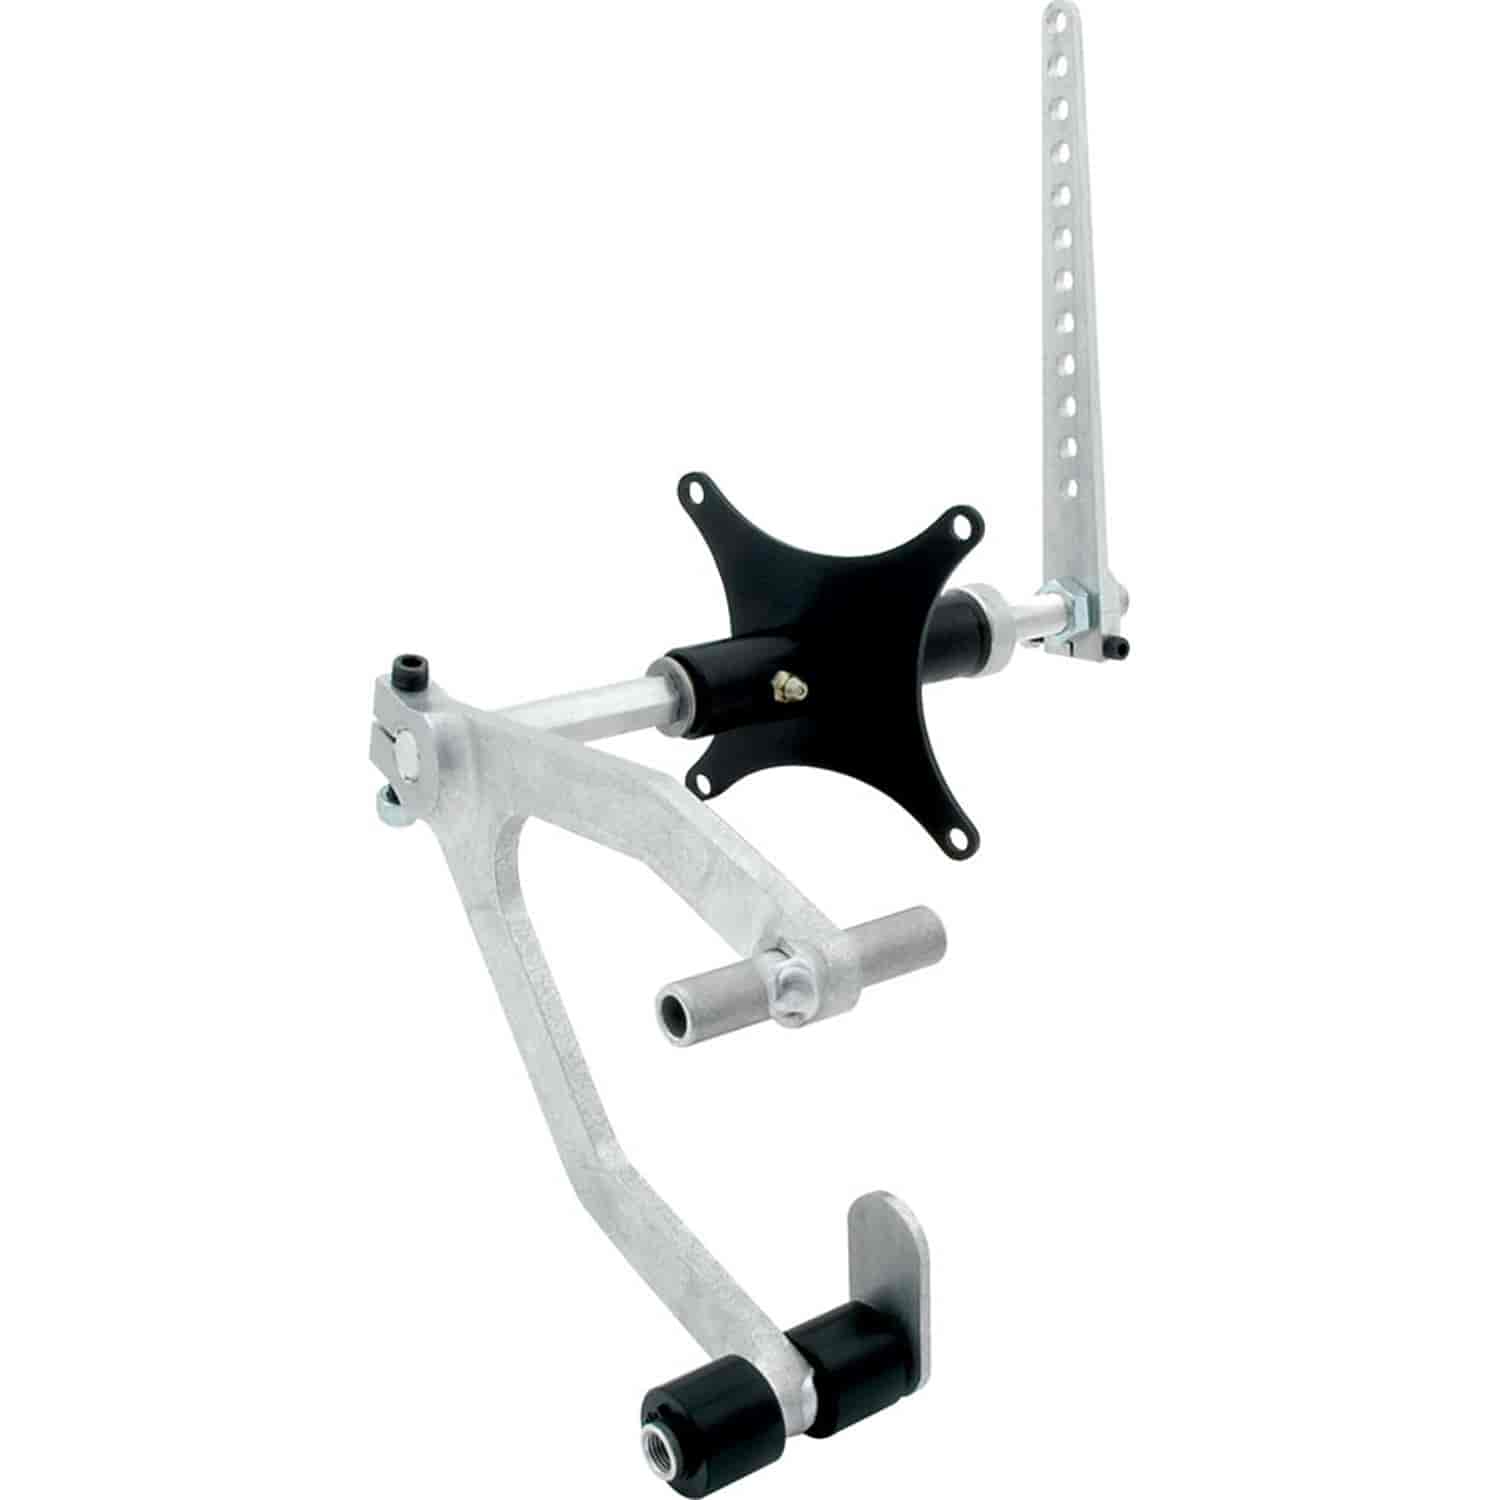 Adjustable Gas Pedal Straight Foot Box Pedal